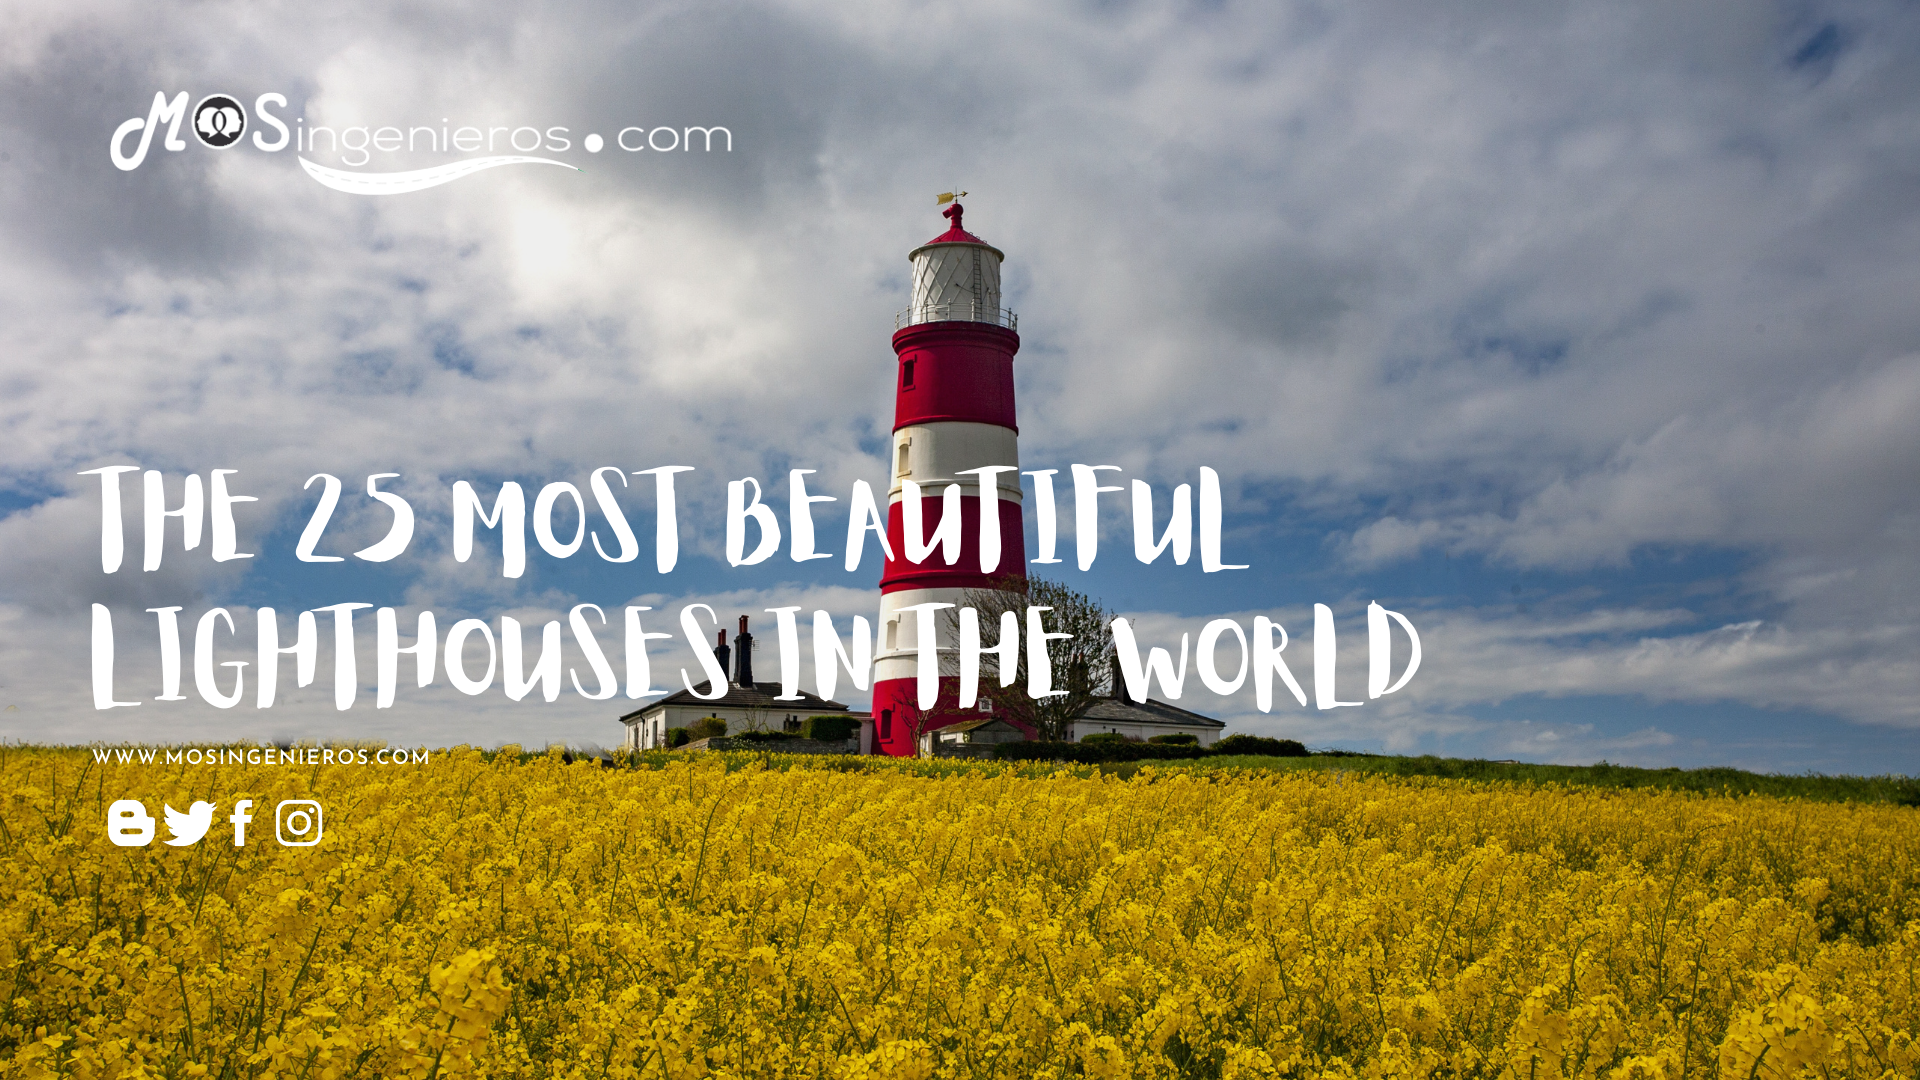 THE 25 MOST BEAUTIFUL LIGHTHOUSES IN THE WORLD